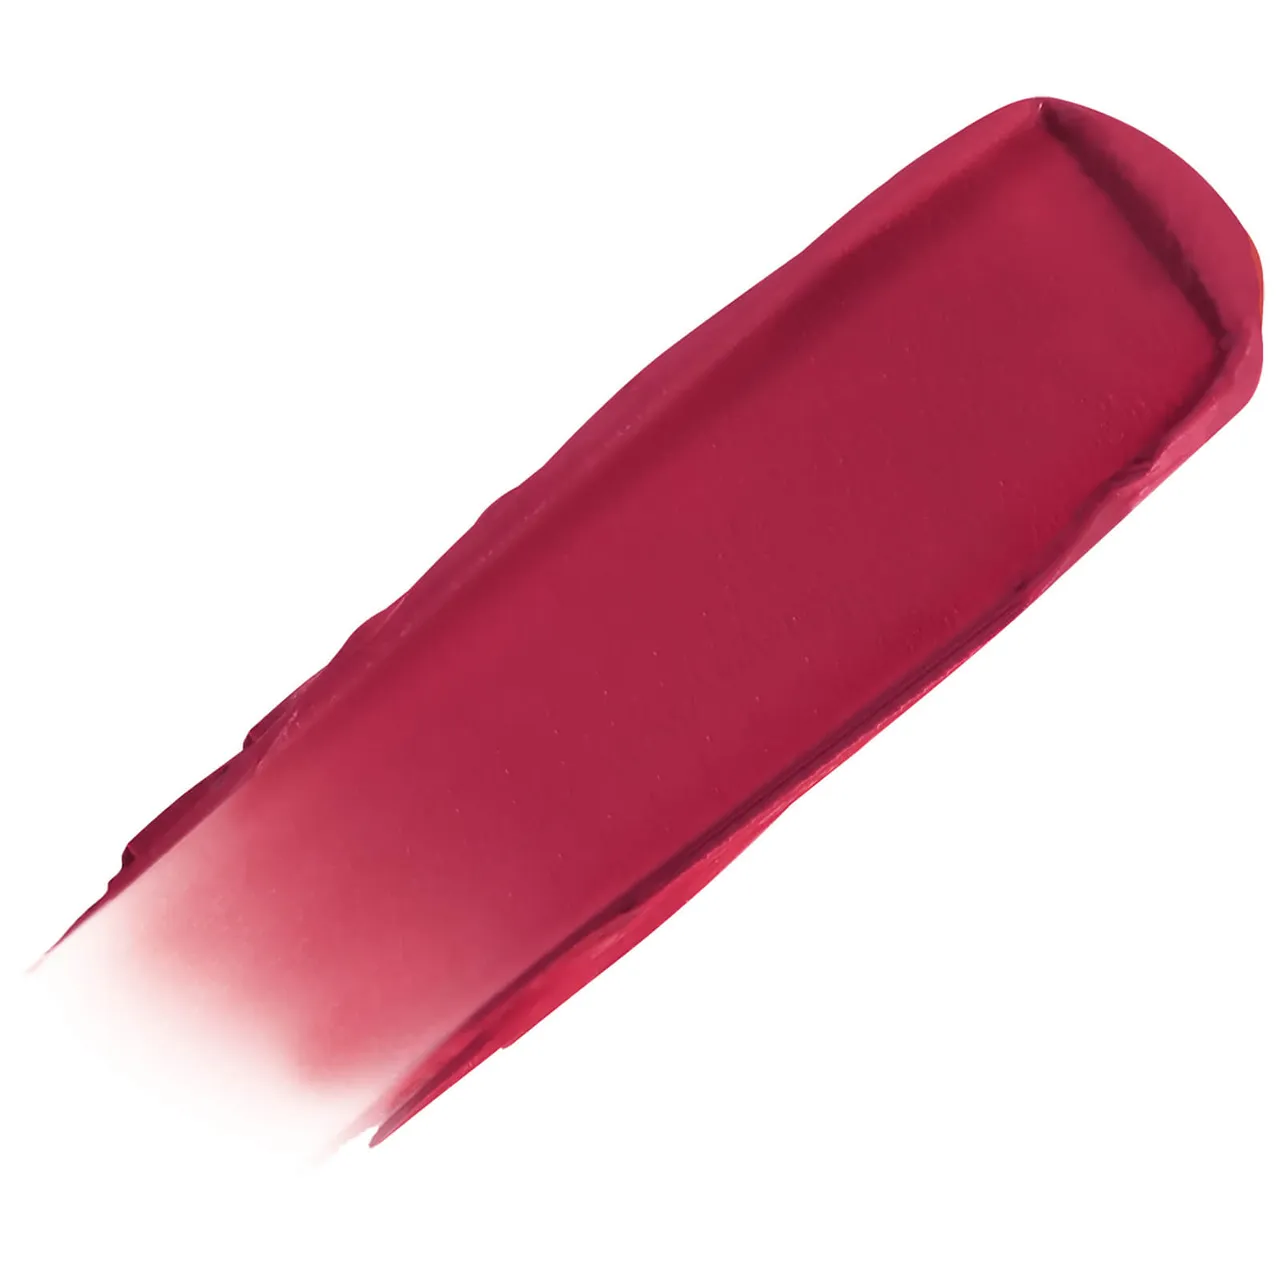 Lancôme L'Absolu Rouge Intimatte Lipstick 3.4ml (Various Shades) - 525 French Bisou